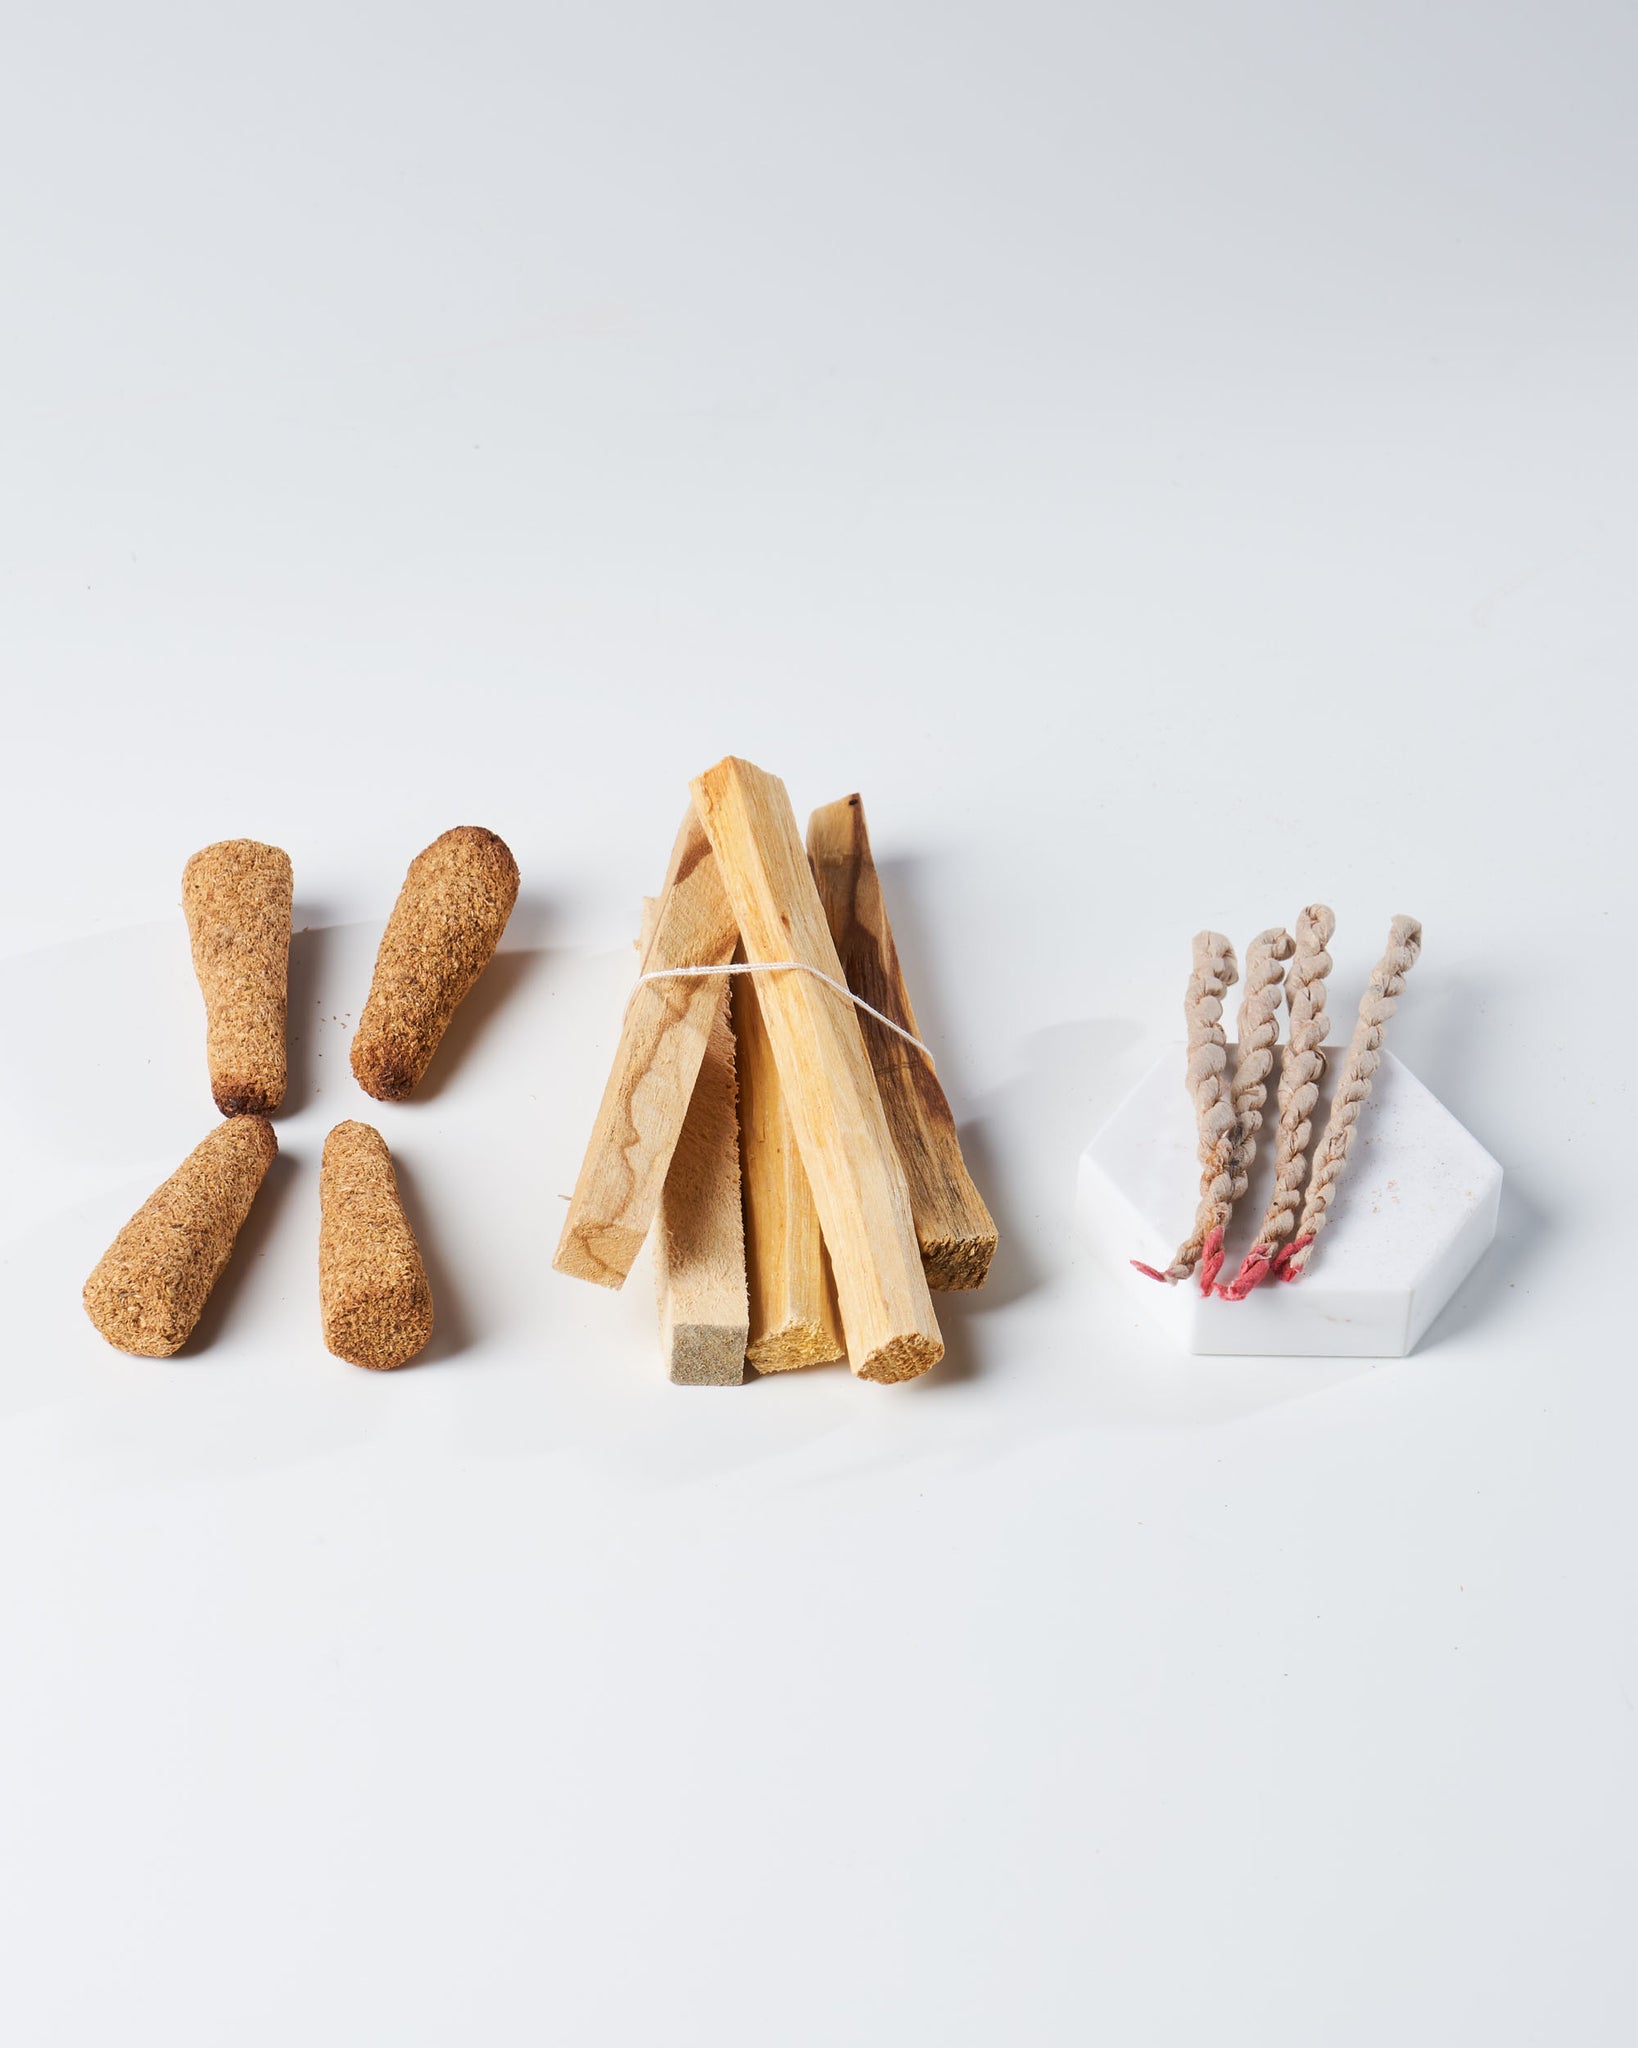 Palo Trio: Palo Santo Sticks, Cones, and Sal Tree Rope Incense Kit - Elevate Your Space with Sacred Energy